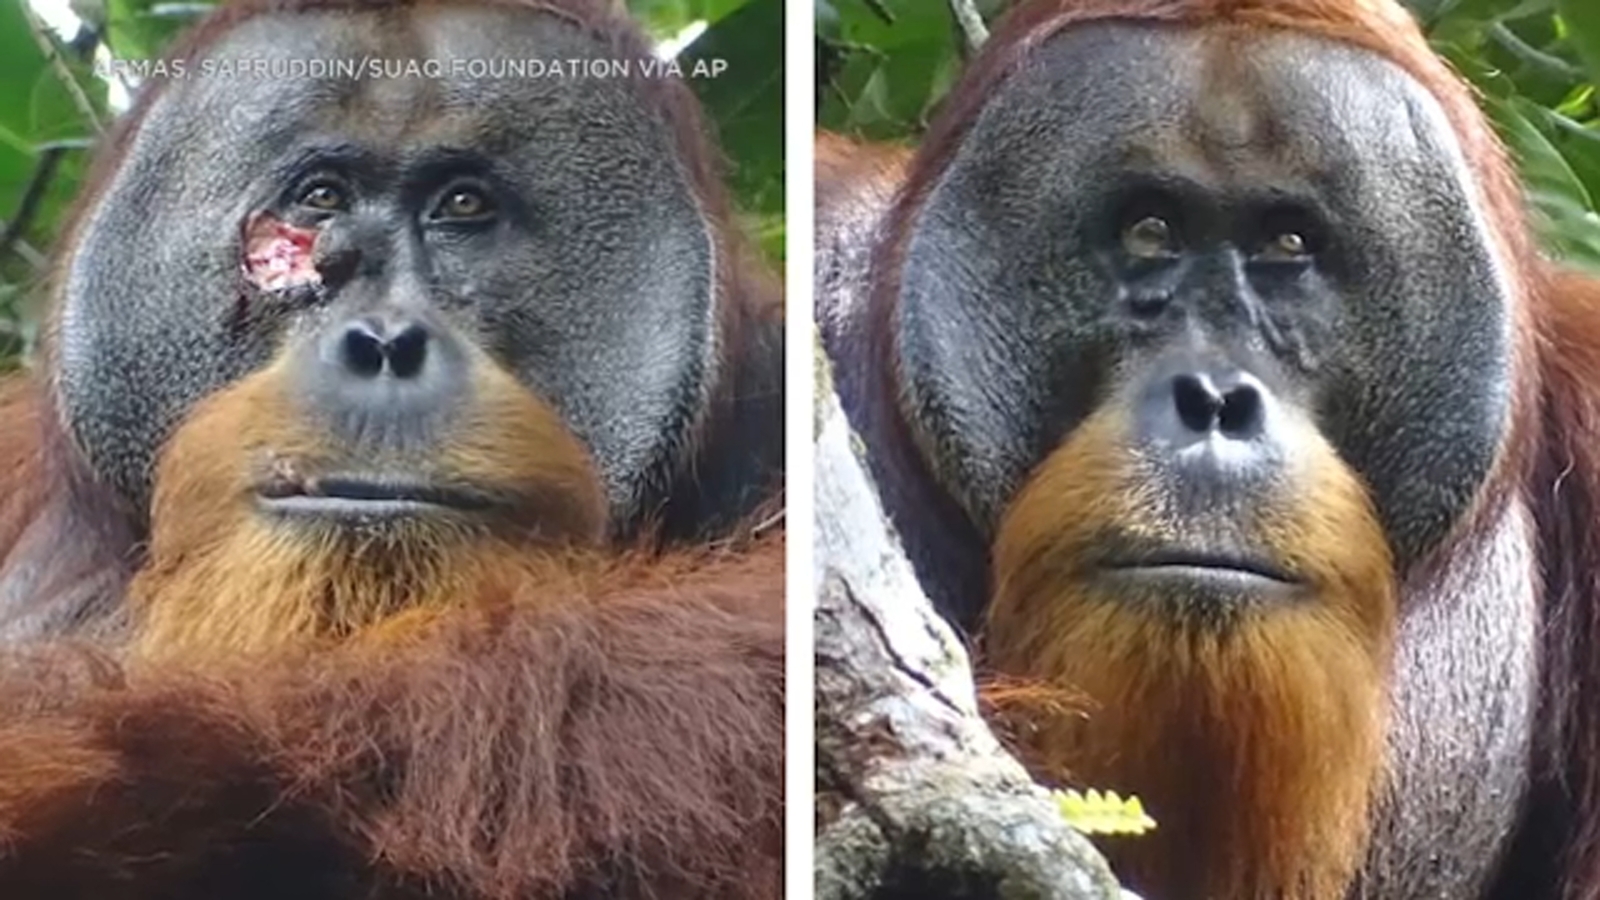 Orangutan uses medicinal plant to treat wound in the wild, scientists say [Video]